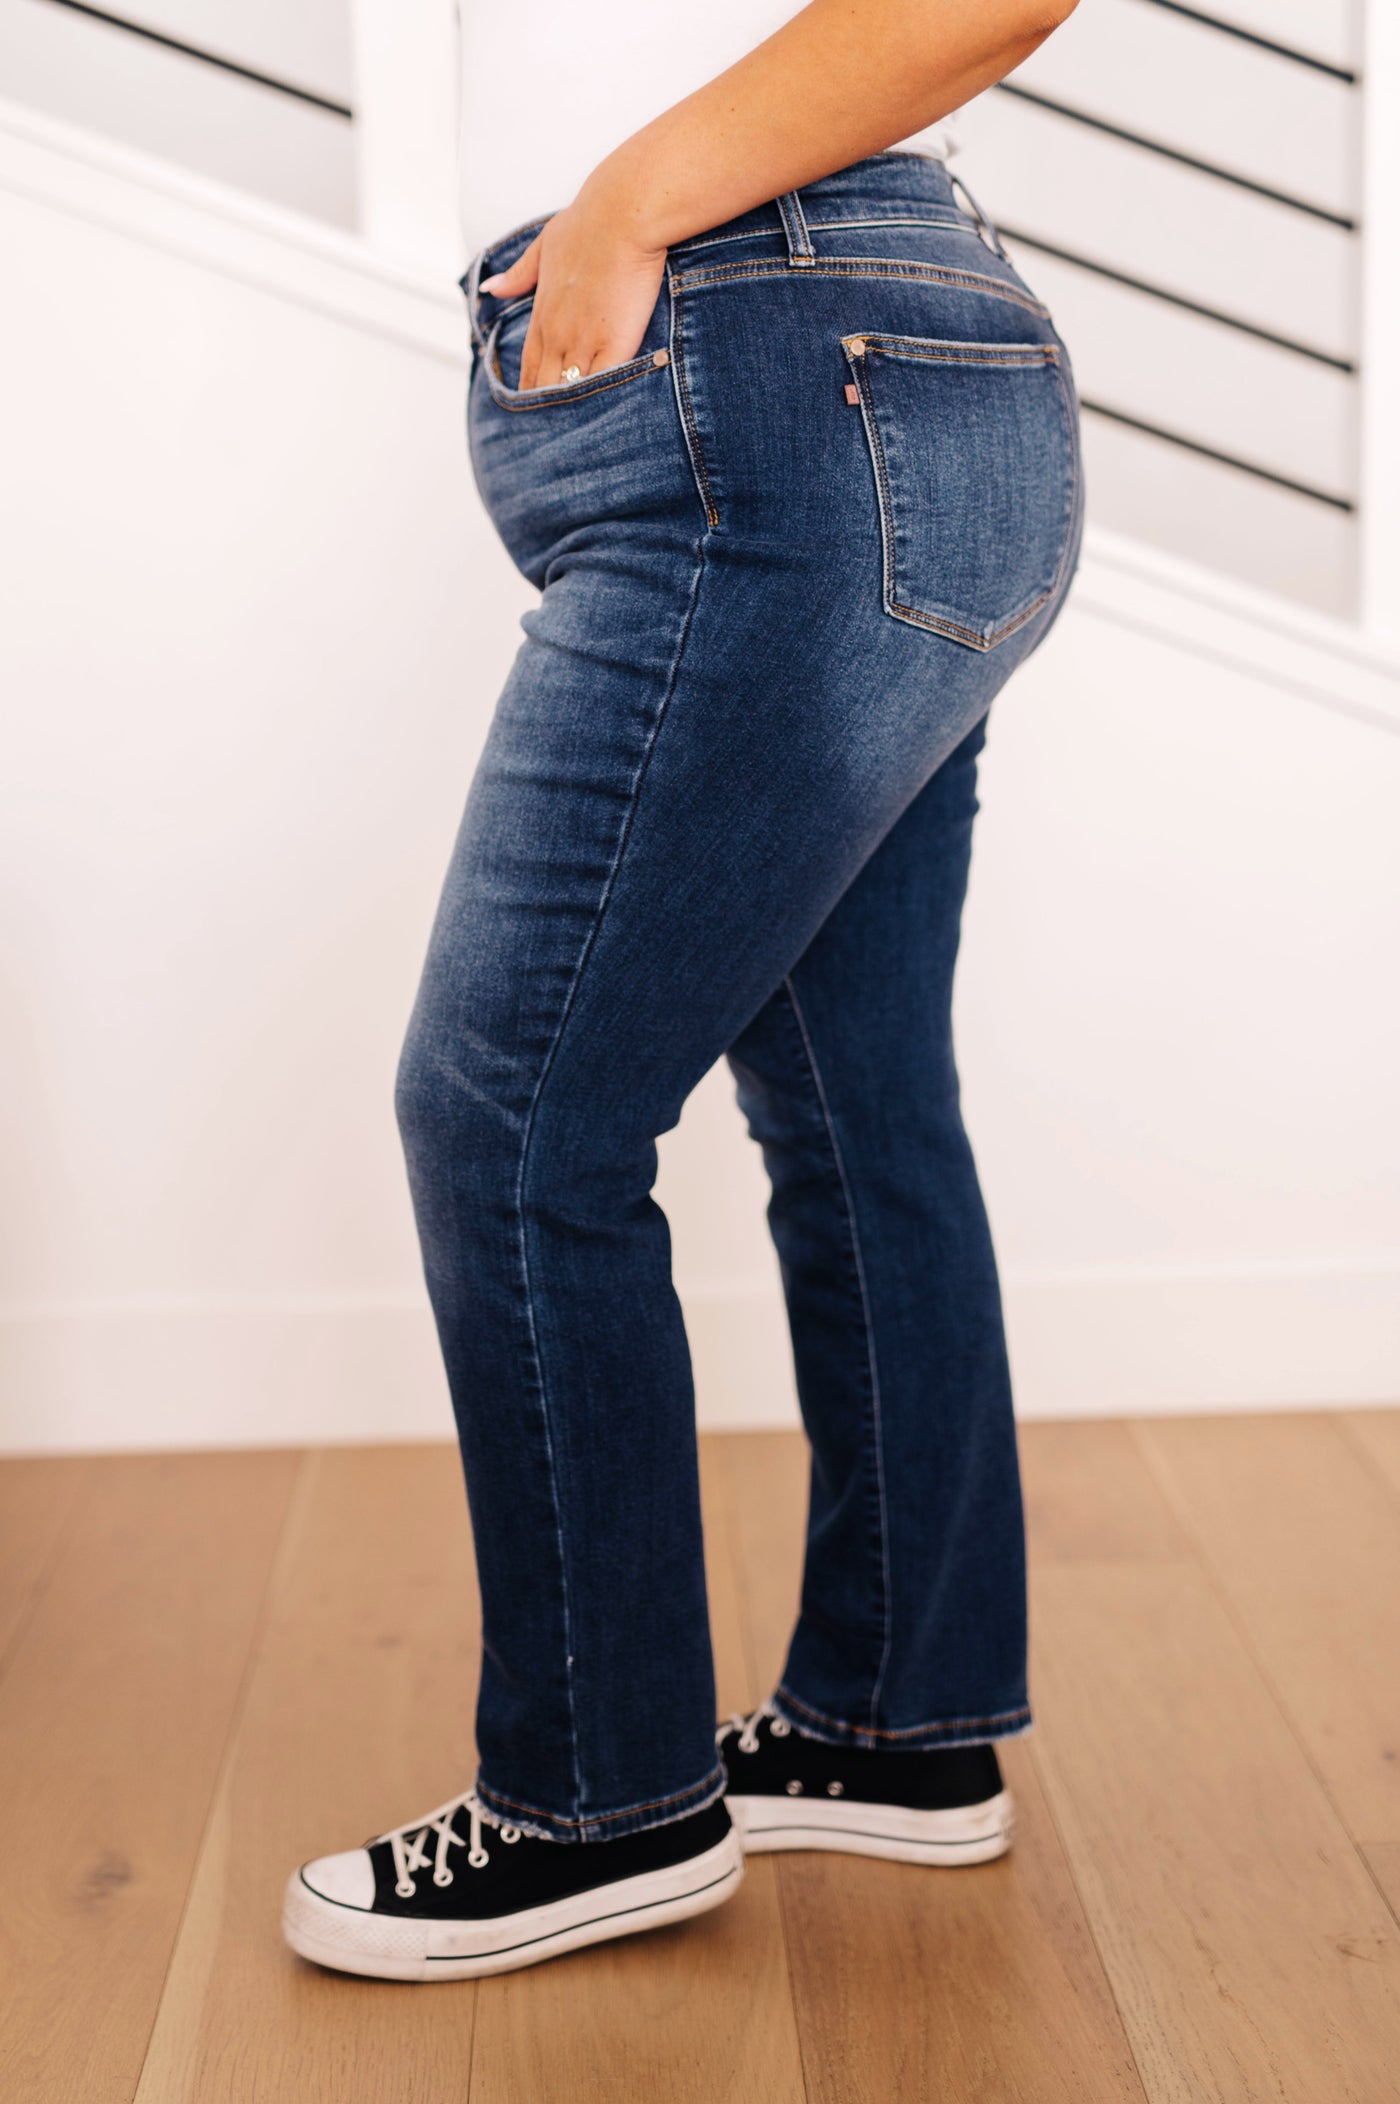 Stay warm year-round with Estelle High Waist Thermal Straight Jeans fro Judy Blue.